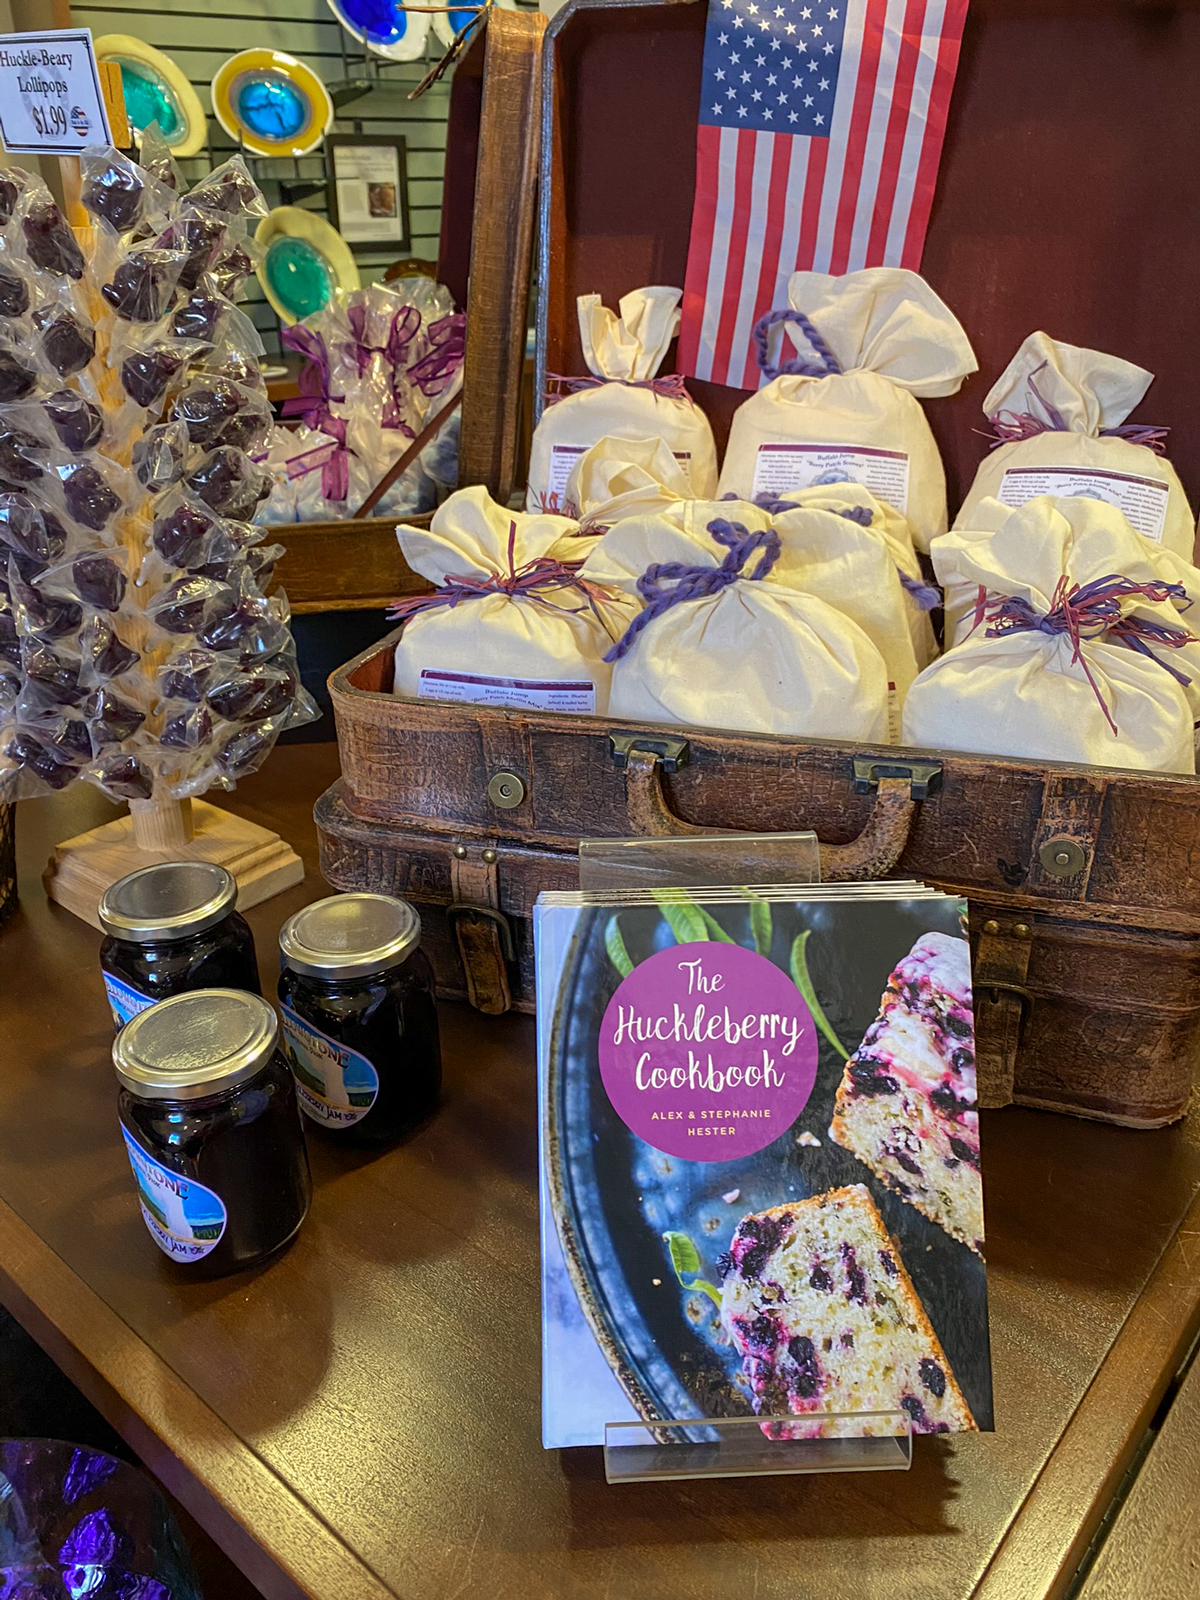 Huckleberry products at Lake Yellowstone Hotel Gift Shop